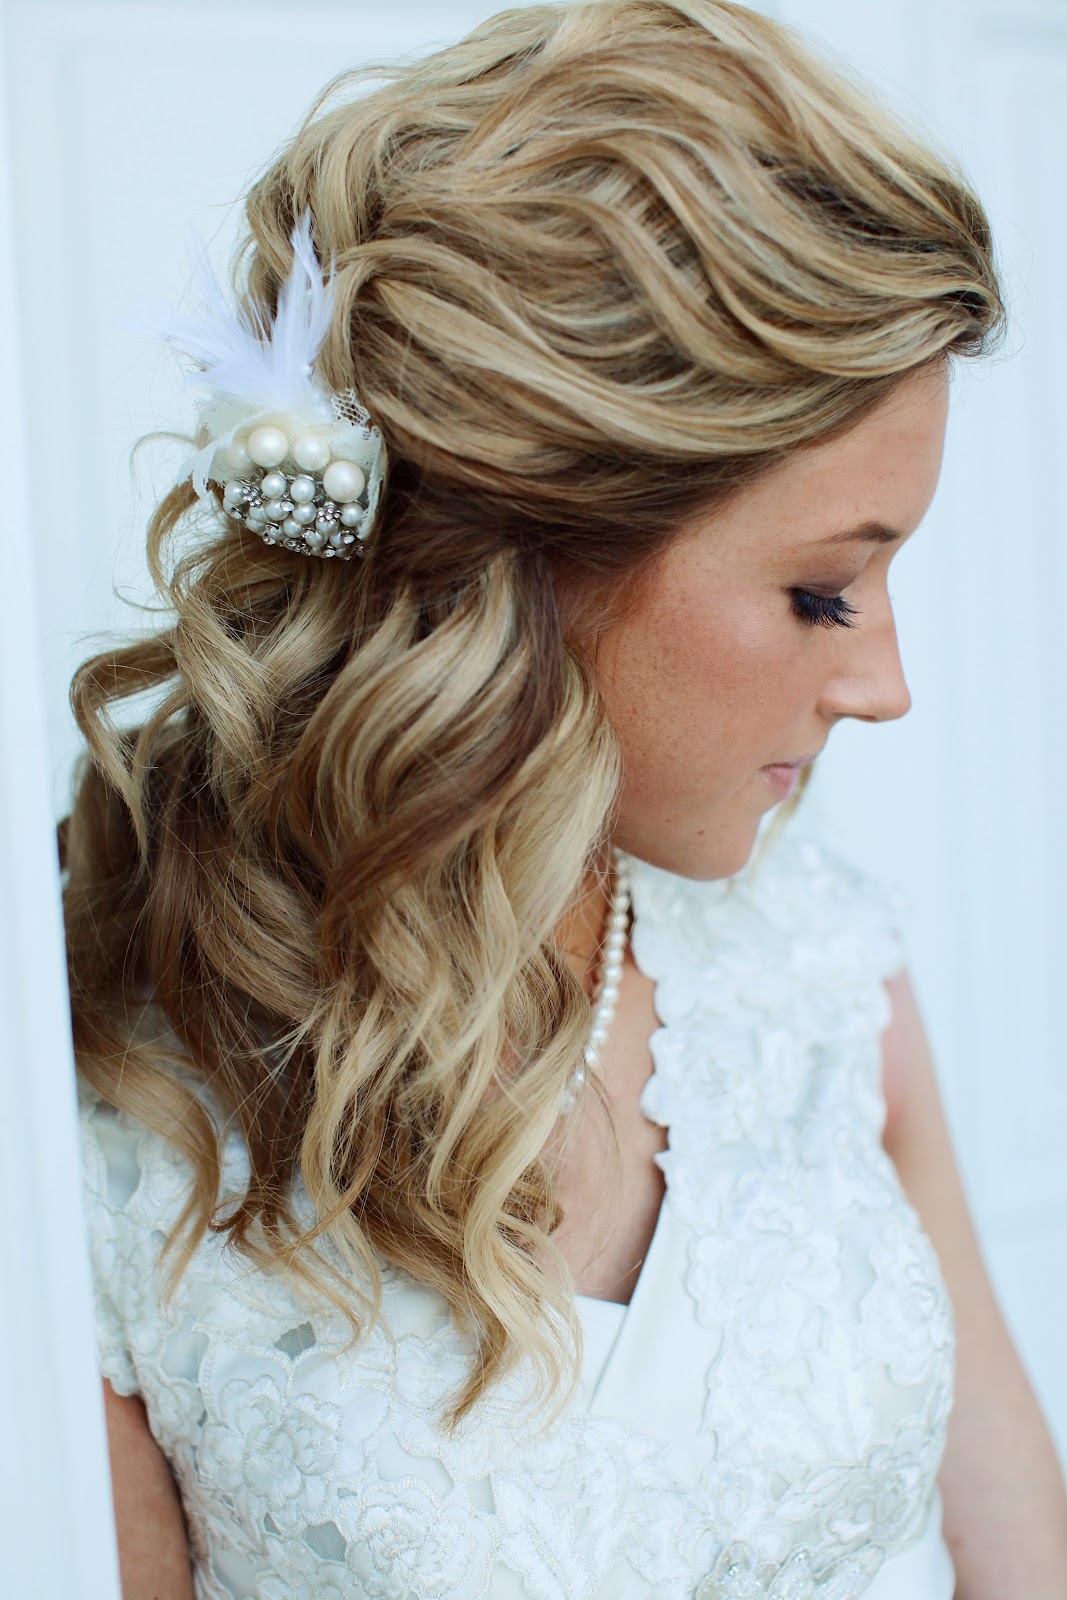 Half-Up Wedding Hairstyles with bangs for Long Hair